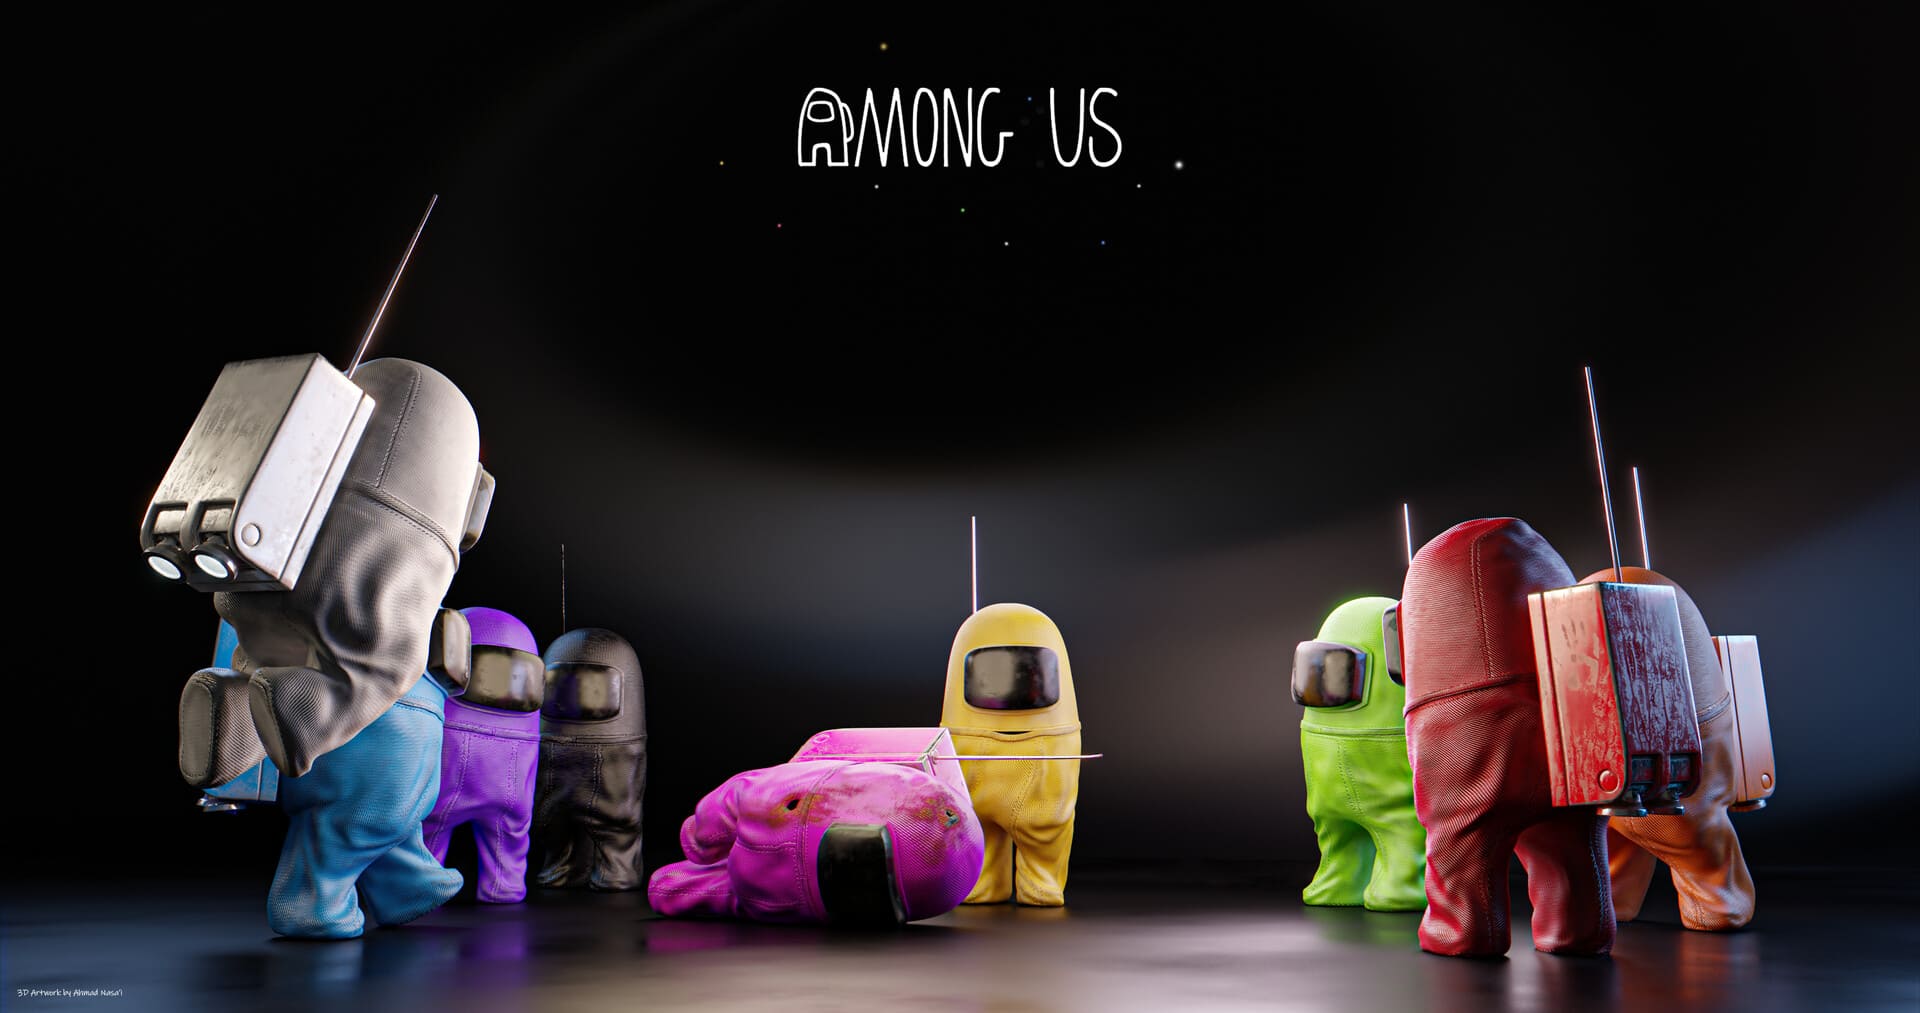 Among Us Wallpapers Wallpaper Cave - Riset